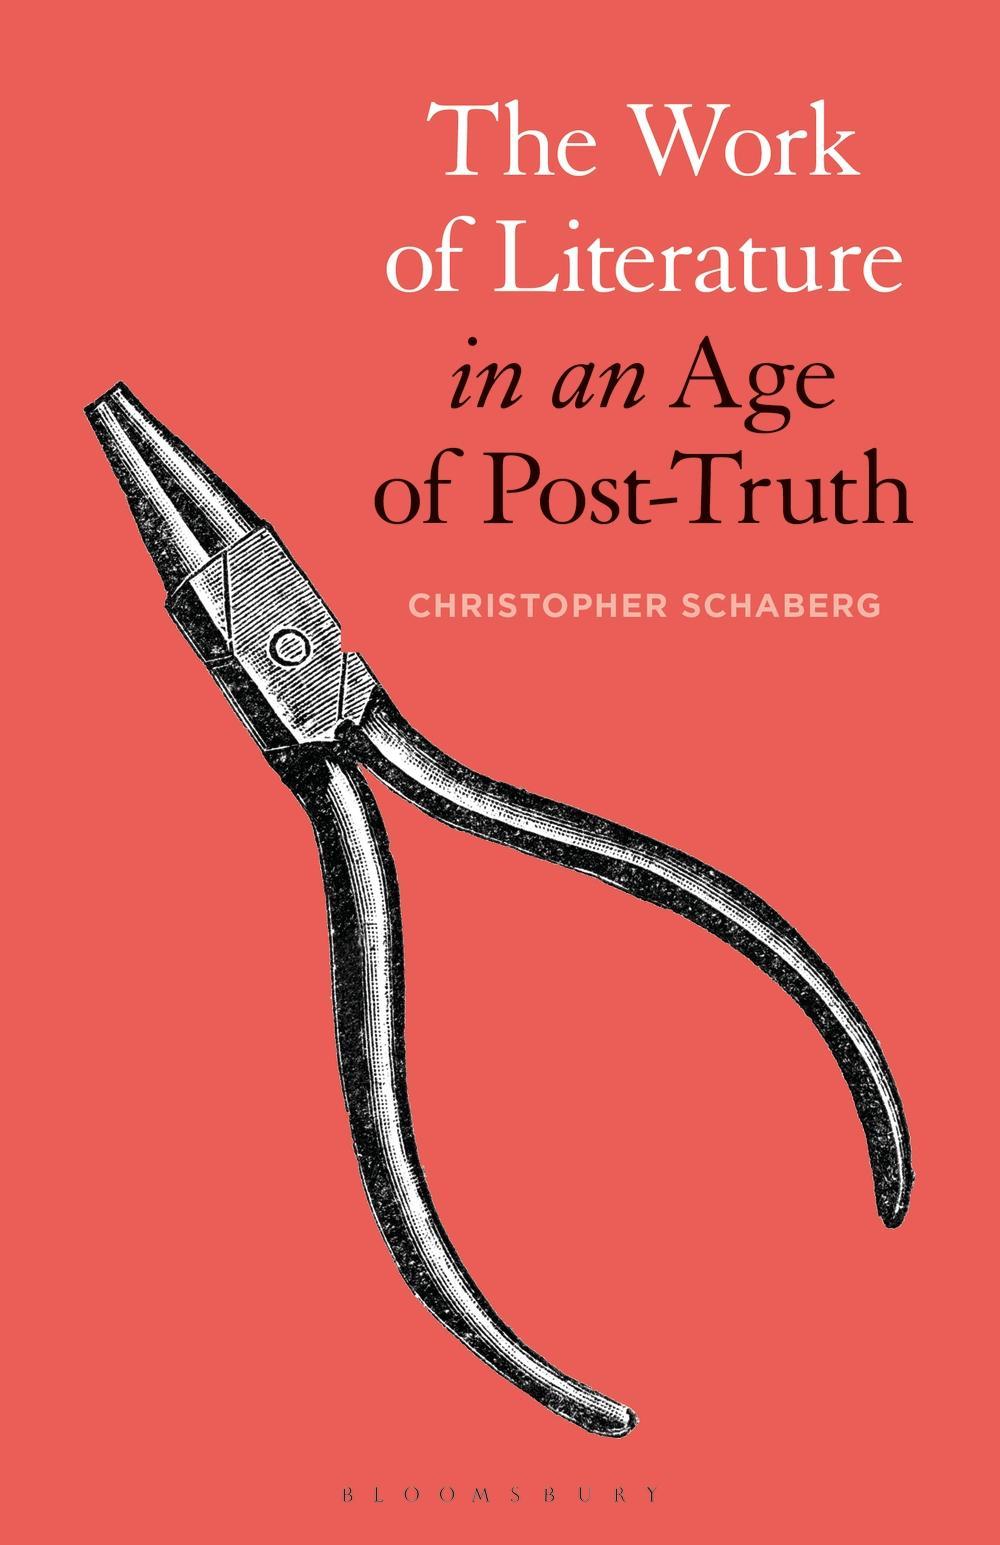 Work of Literature in an Age of Post-Truth